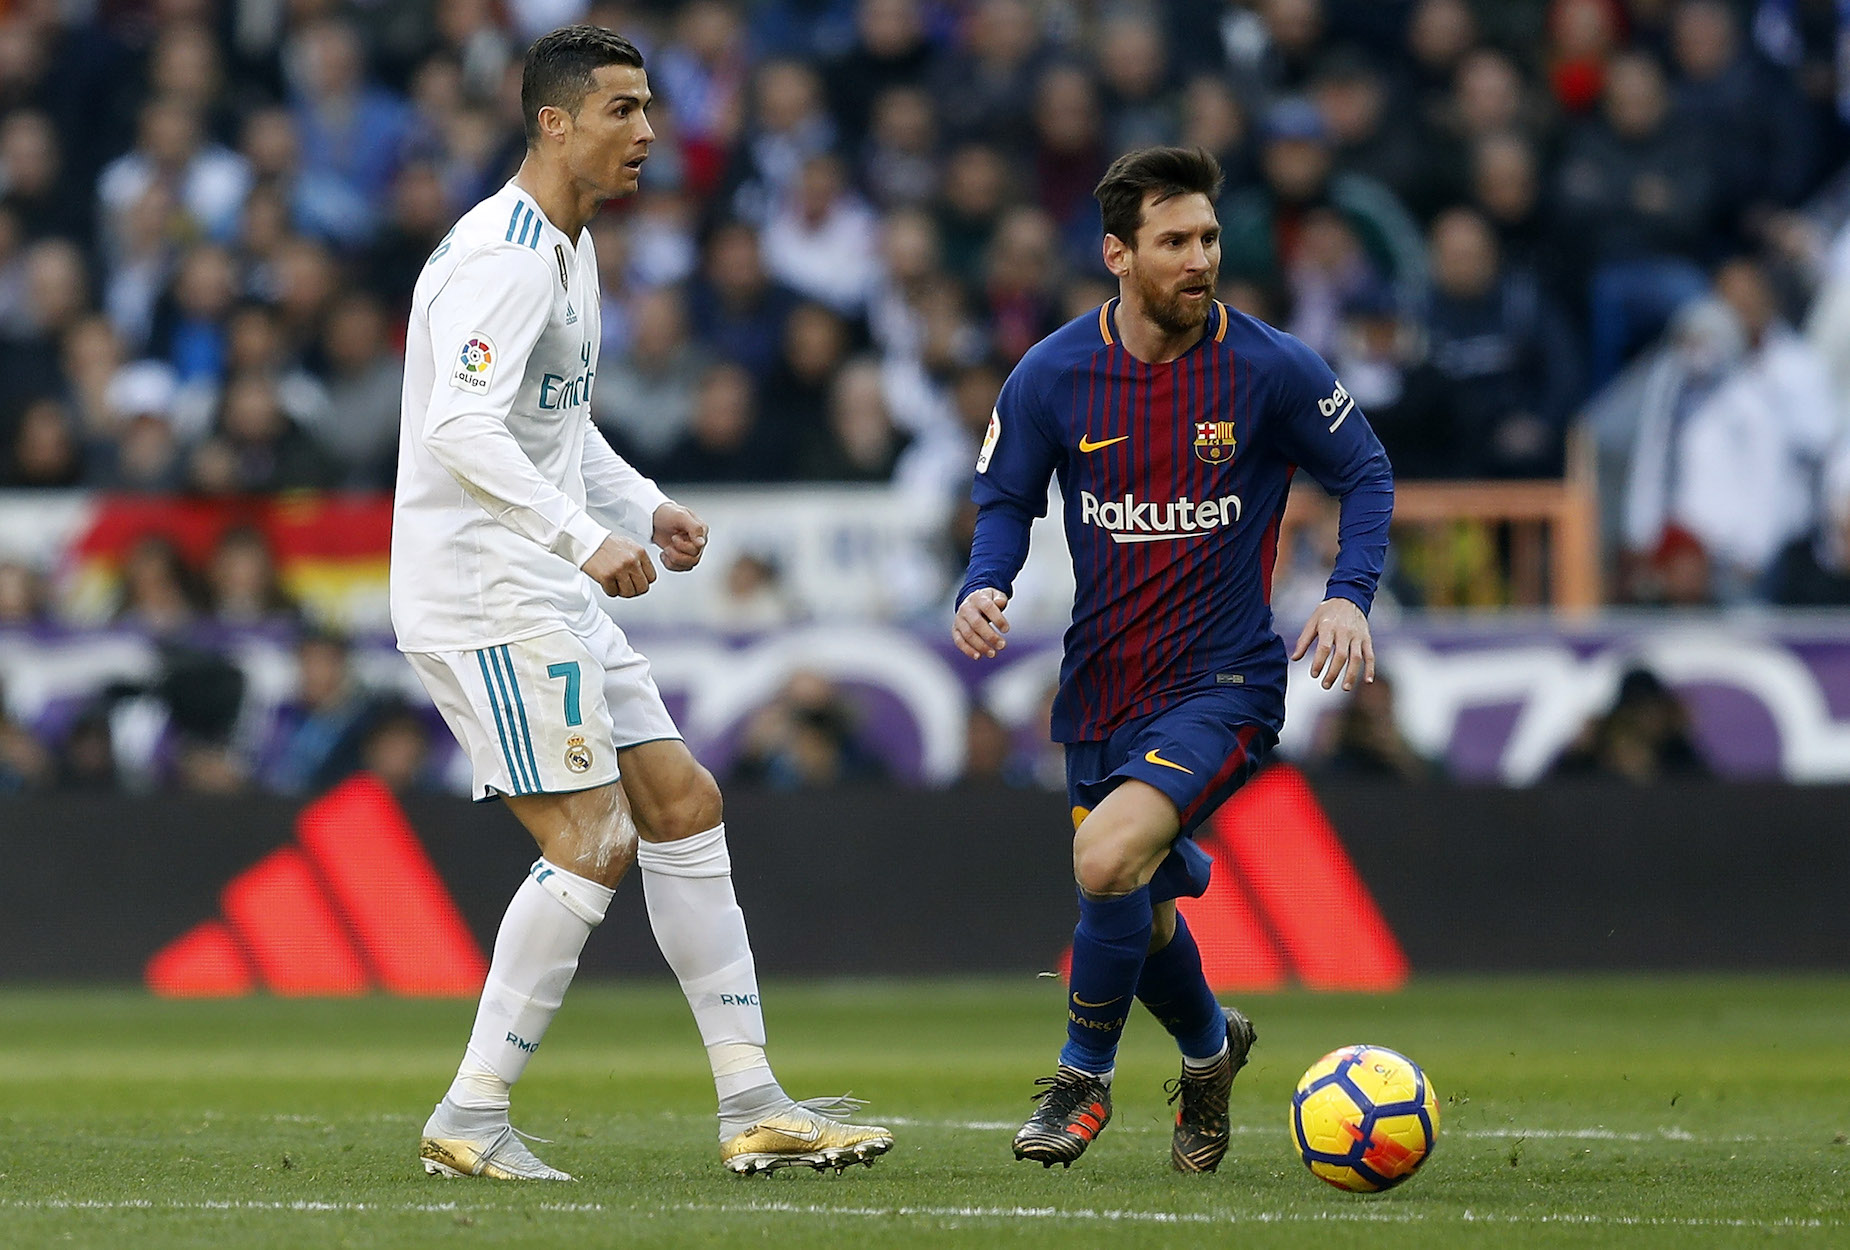 Lionel Messi Just Scored Another Victory in His Rivalry With Cristiano Ronaldo